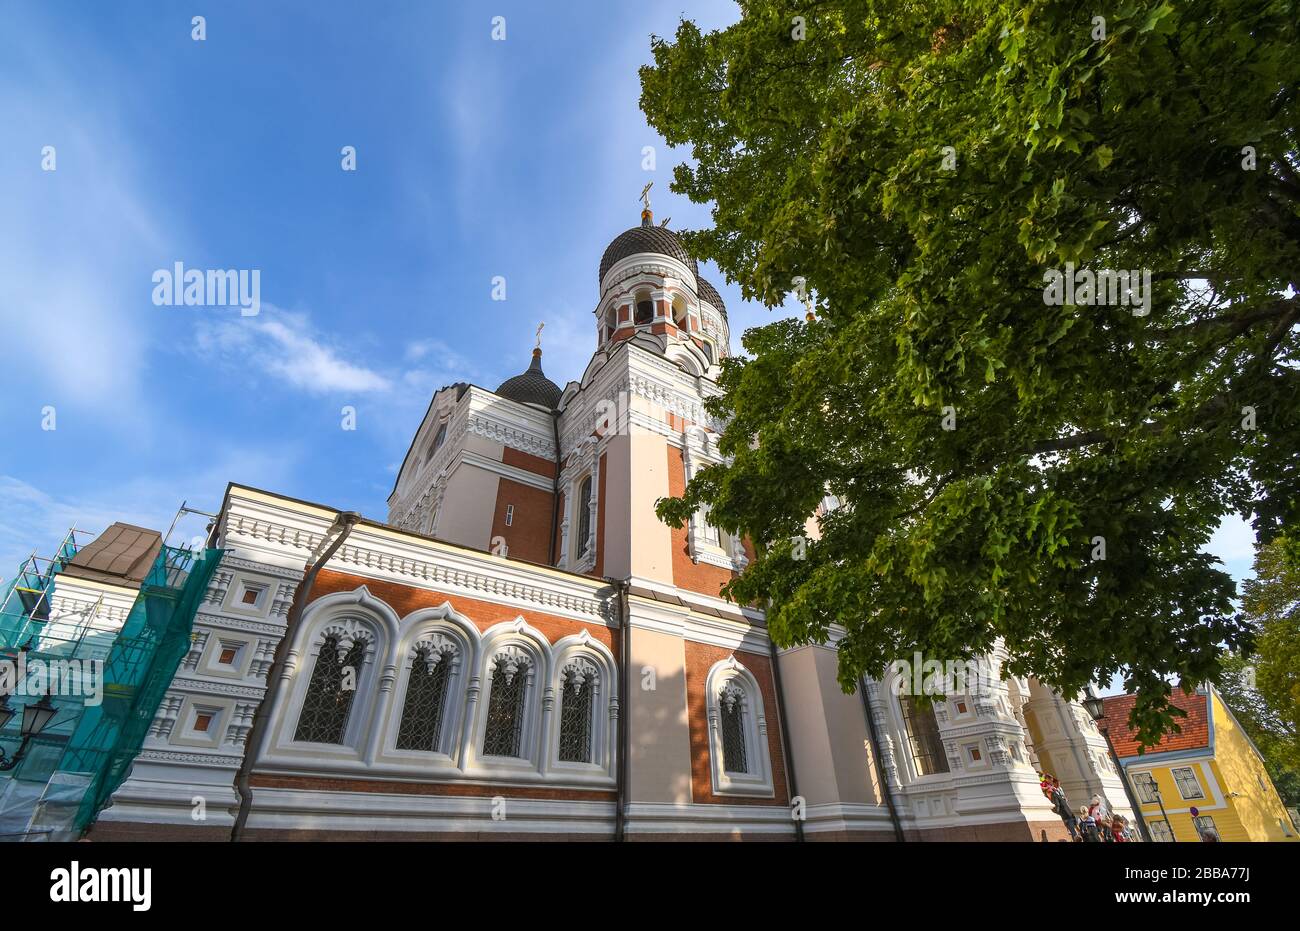 The facade of Alexander Nevsky Cathedral on Toompea Hill in the medieval city of Tallinn Estonia. Stock Photo